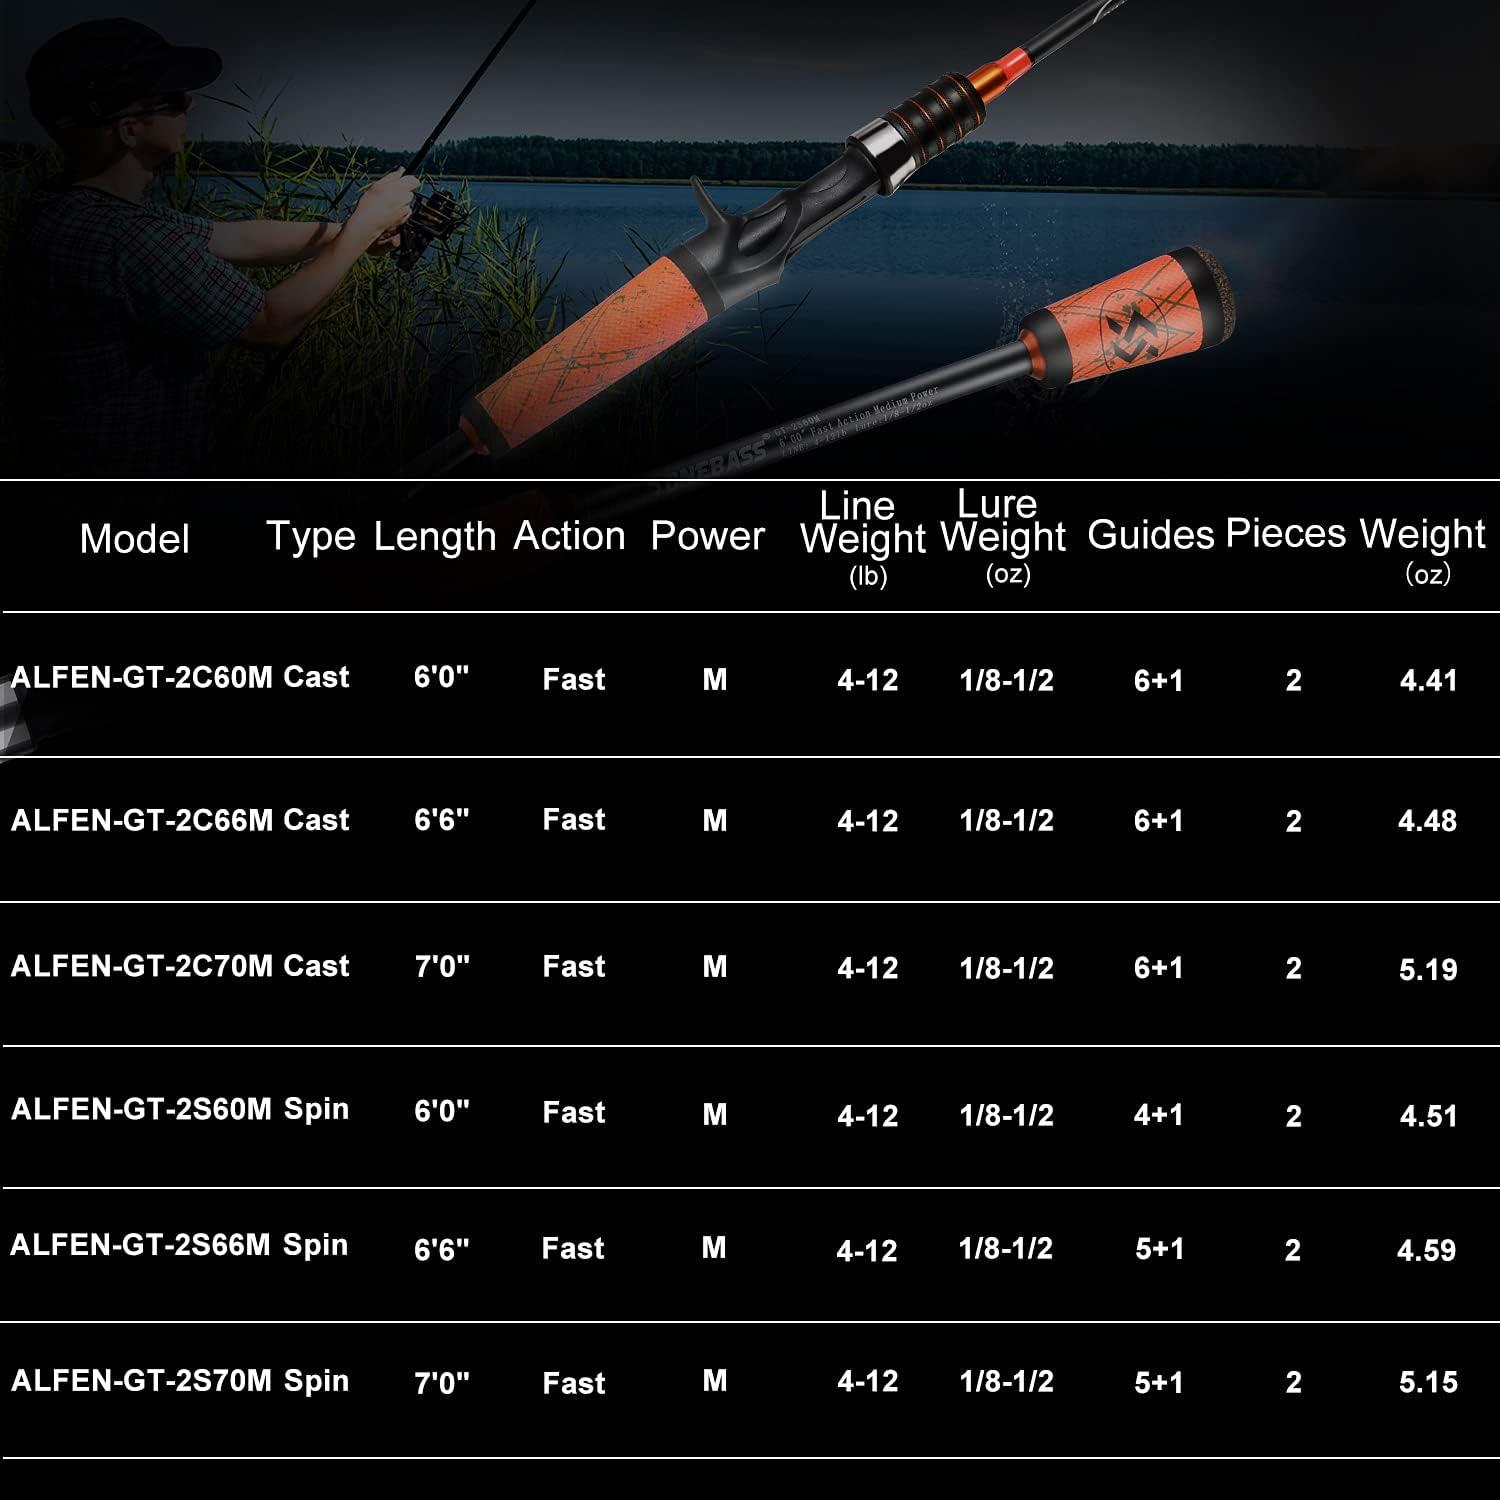 One Bass Fishing Pole 24 Ton Carbon Fiber Casting and Spinning Rods - Two  Pieces, SuperPolymer Handle Fishing Rod for Bass Fishing B-Orange-Cast  Cast-6'6Medium-2piece